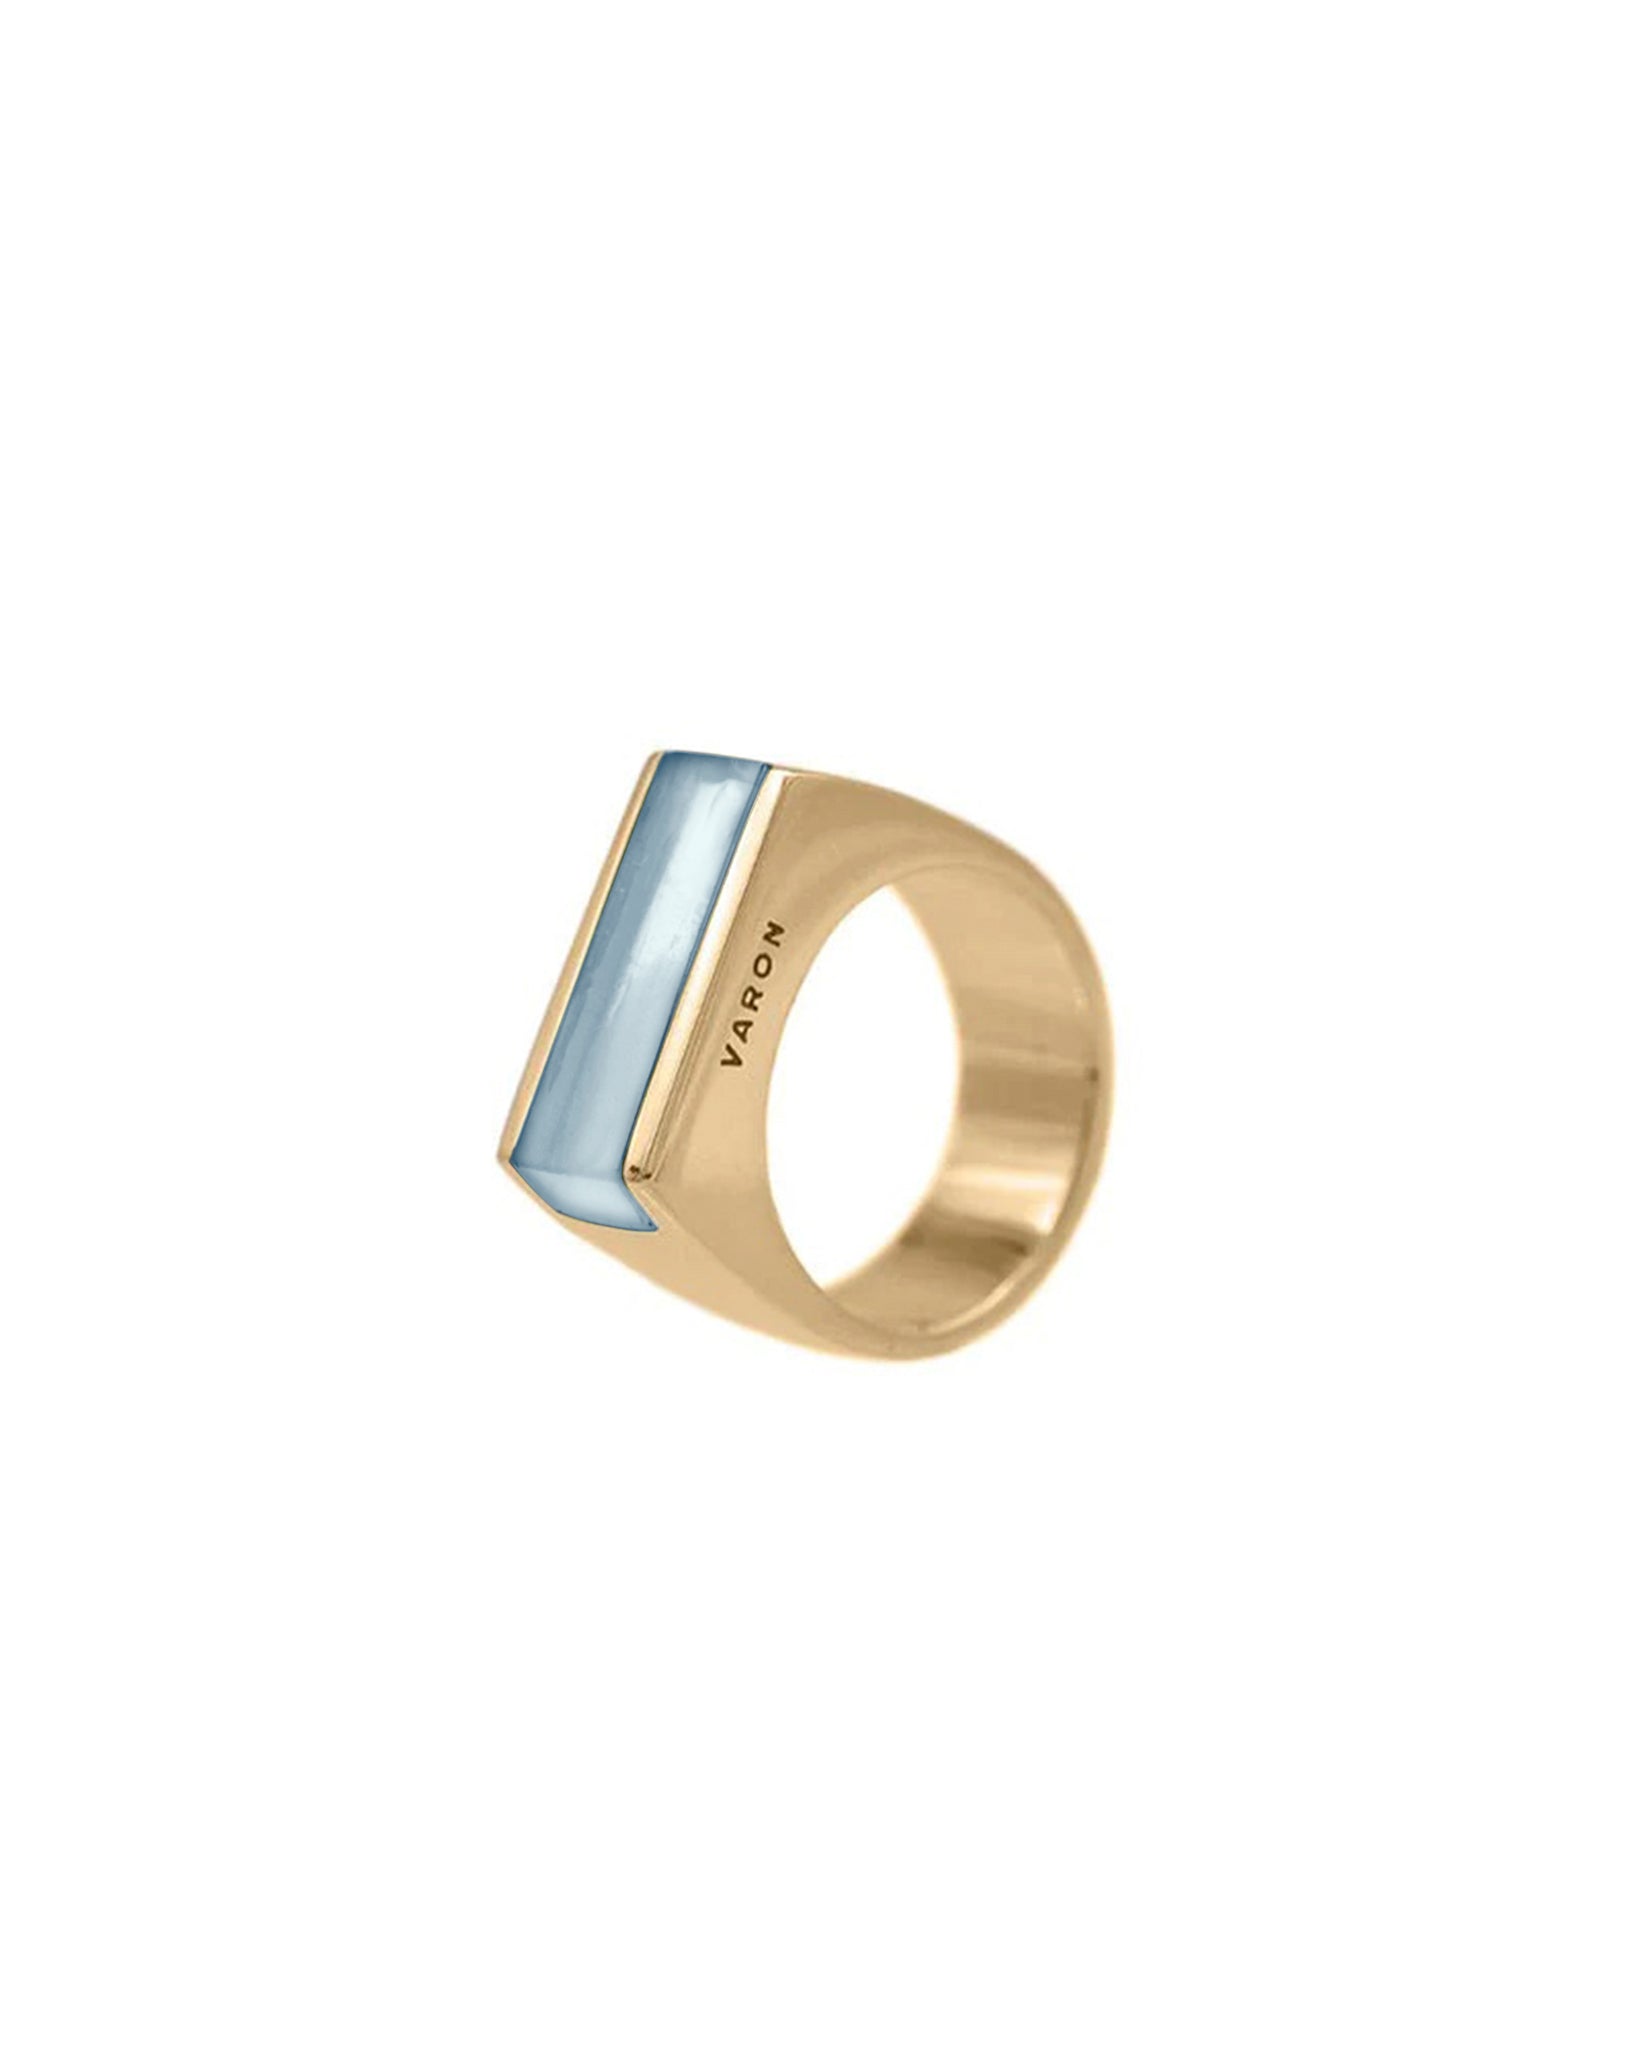 AA Ring - Gold Plated